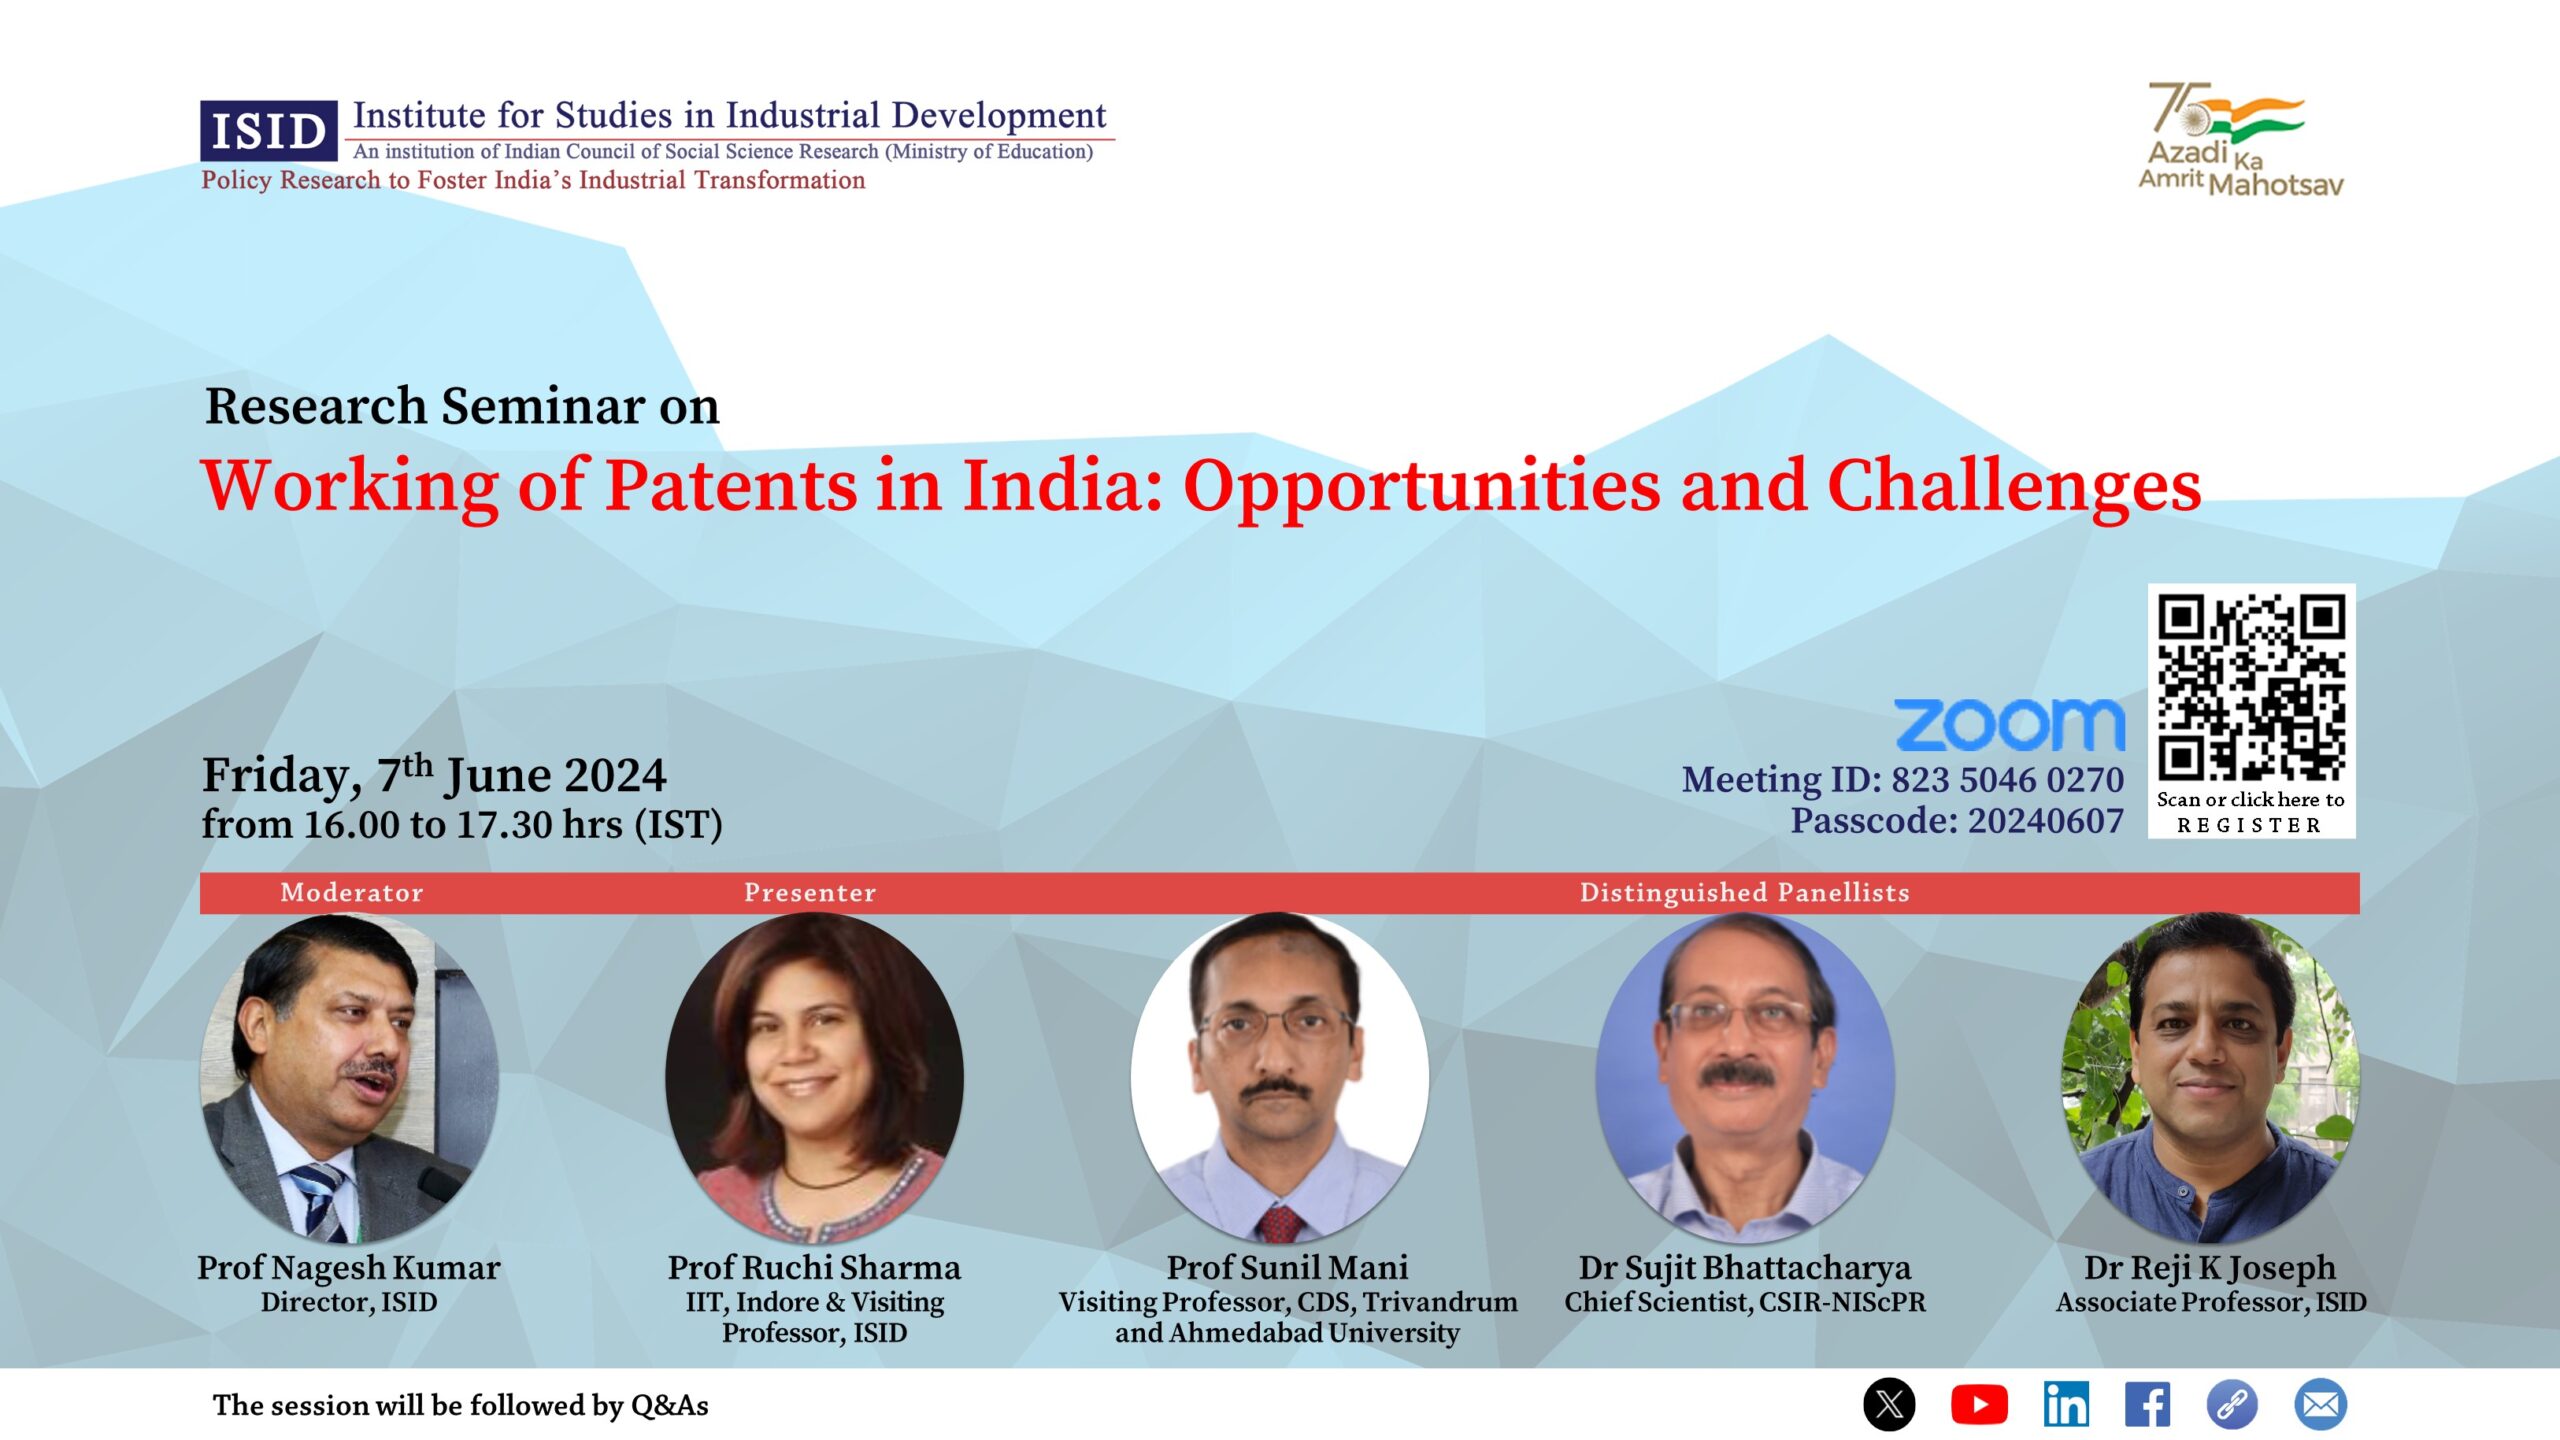 Research Seminar on Working of Patents in India: Opportunities and Challenges